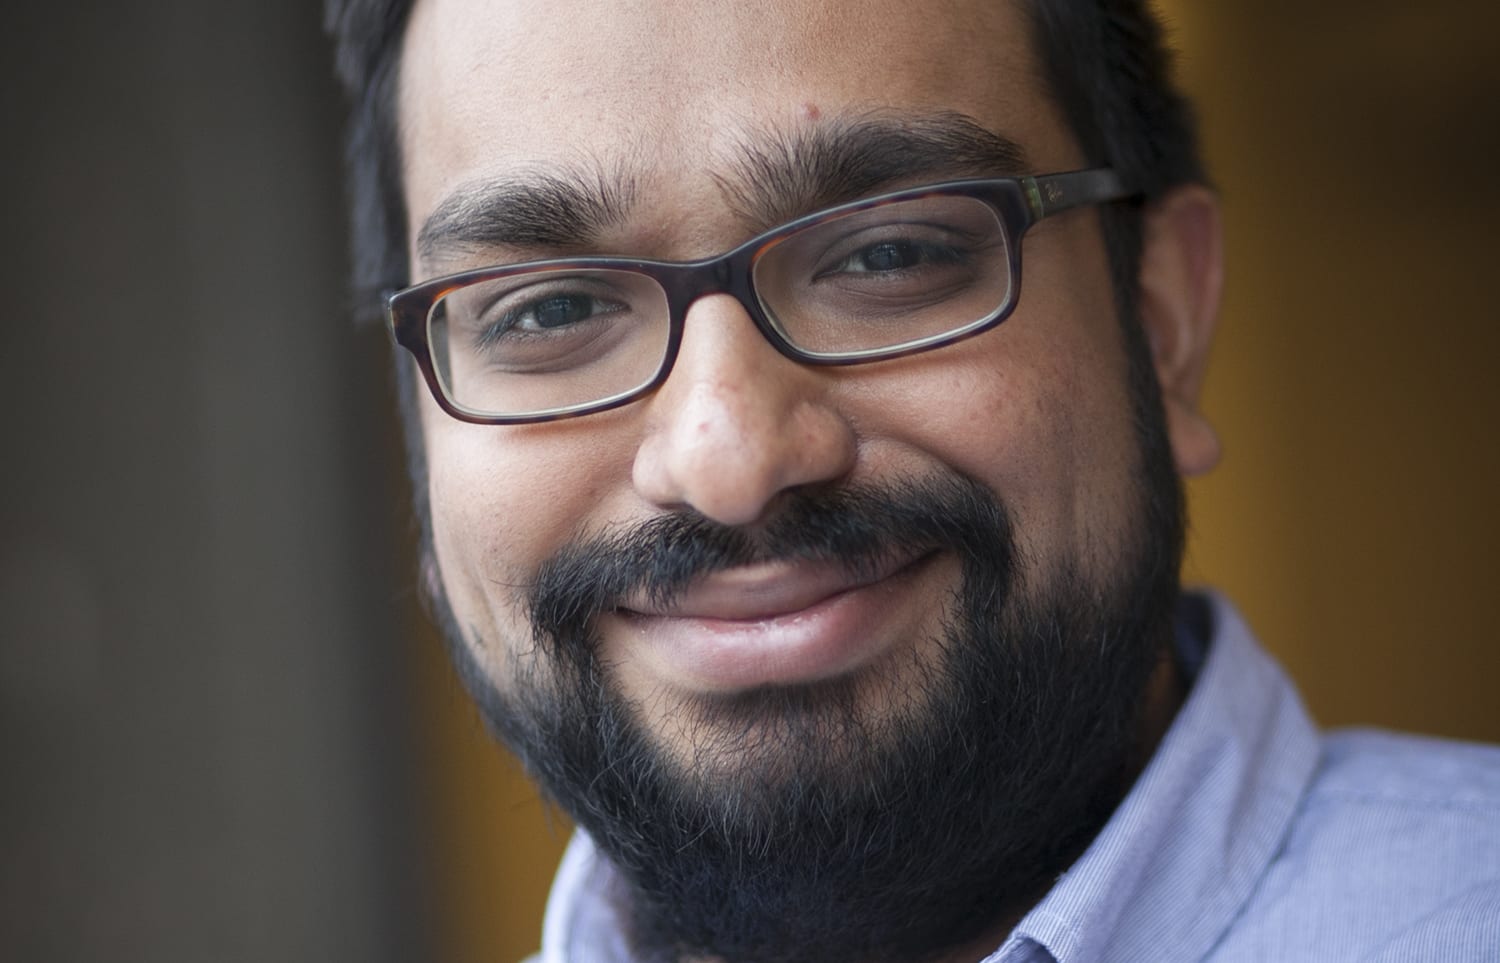 Amit Kumar is an assistant professor of marketing at the University of Texas at Austin's McCombs School of Business.